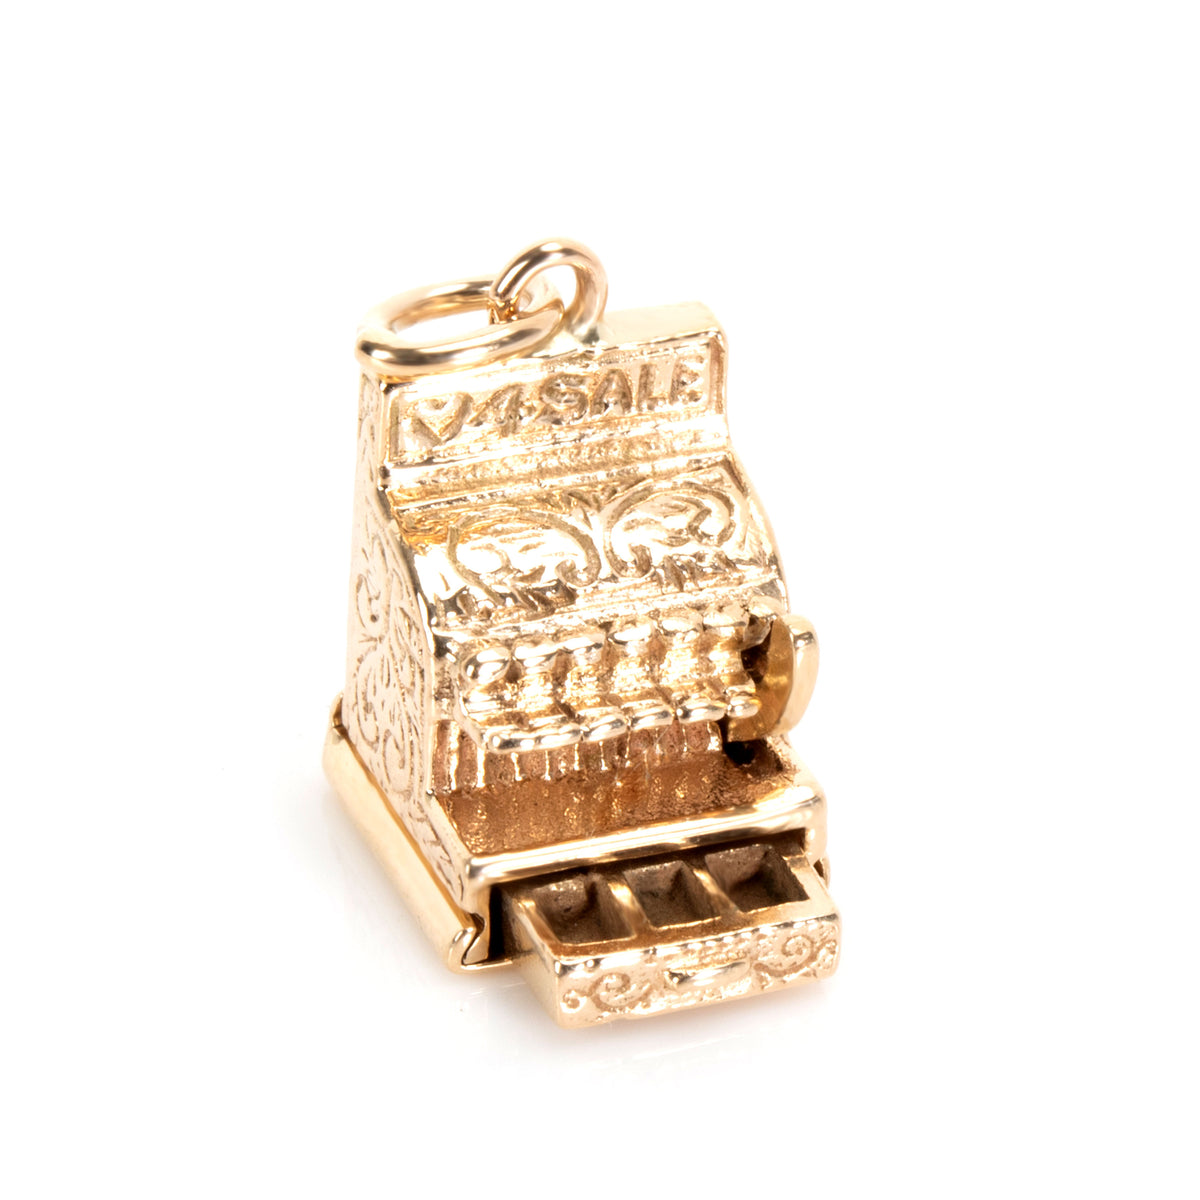 Vintage Cash Register Charm in 14K Yellow Gold